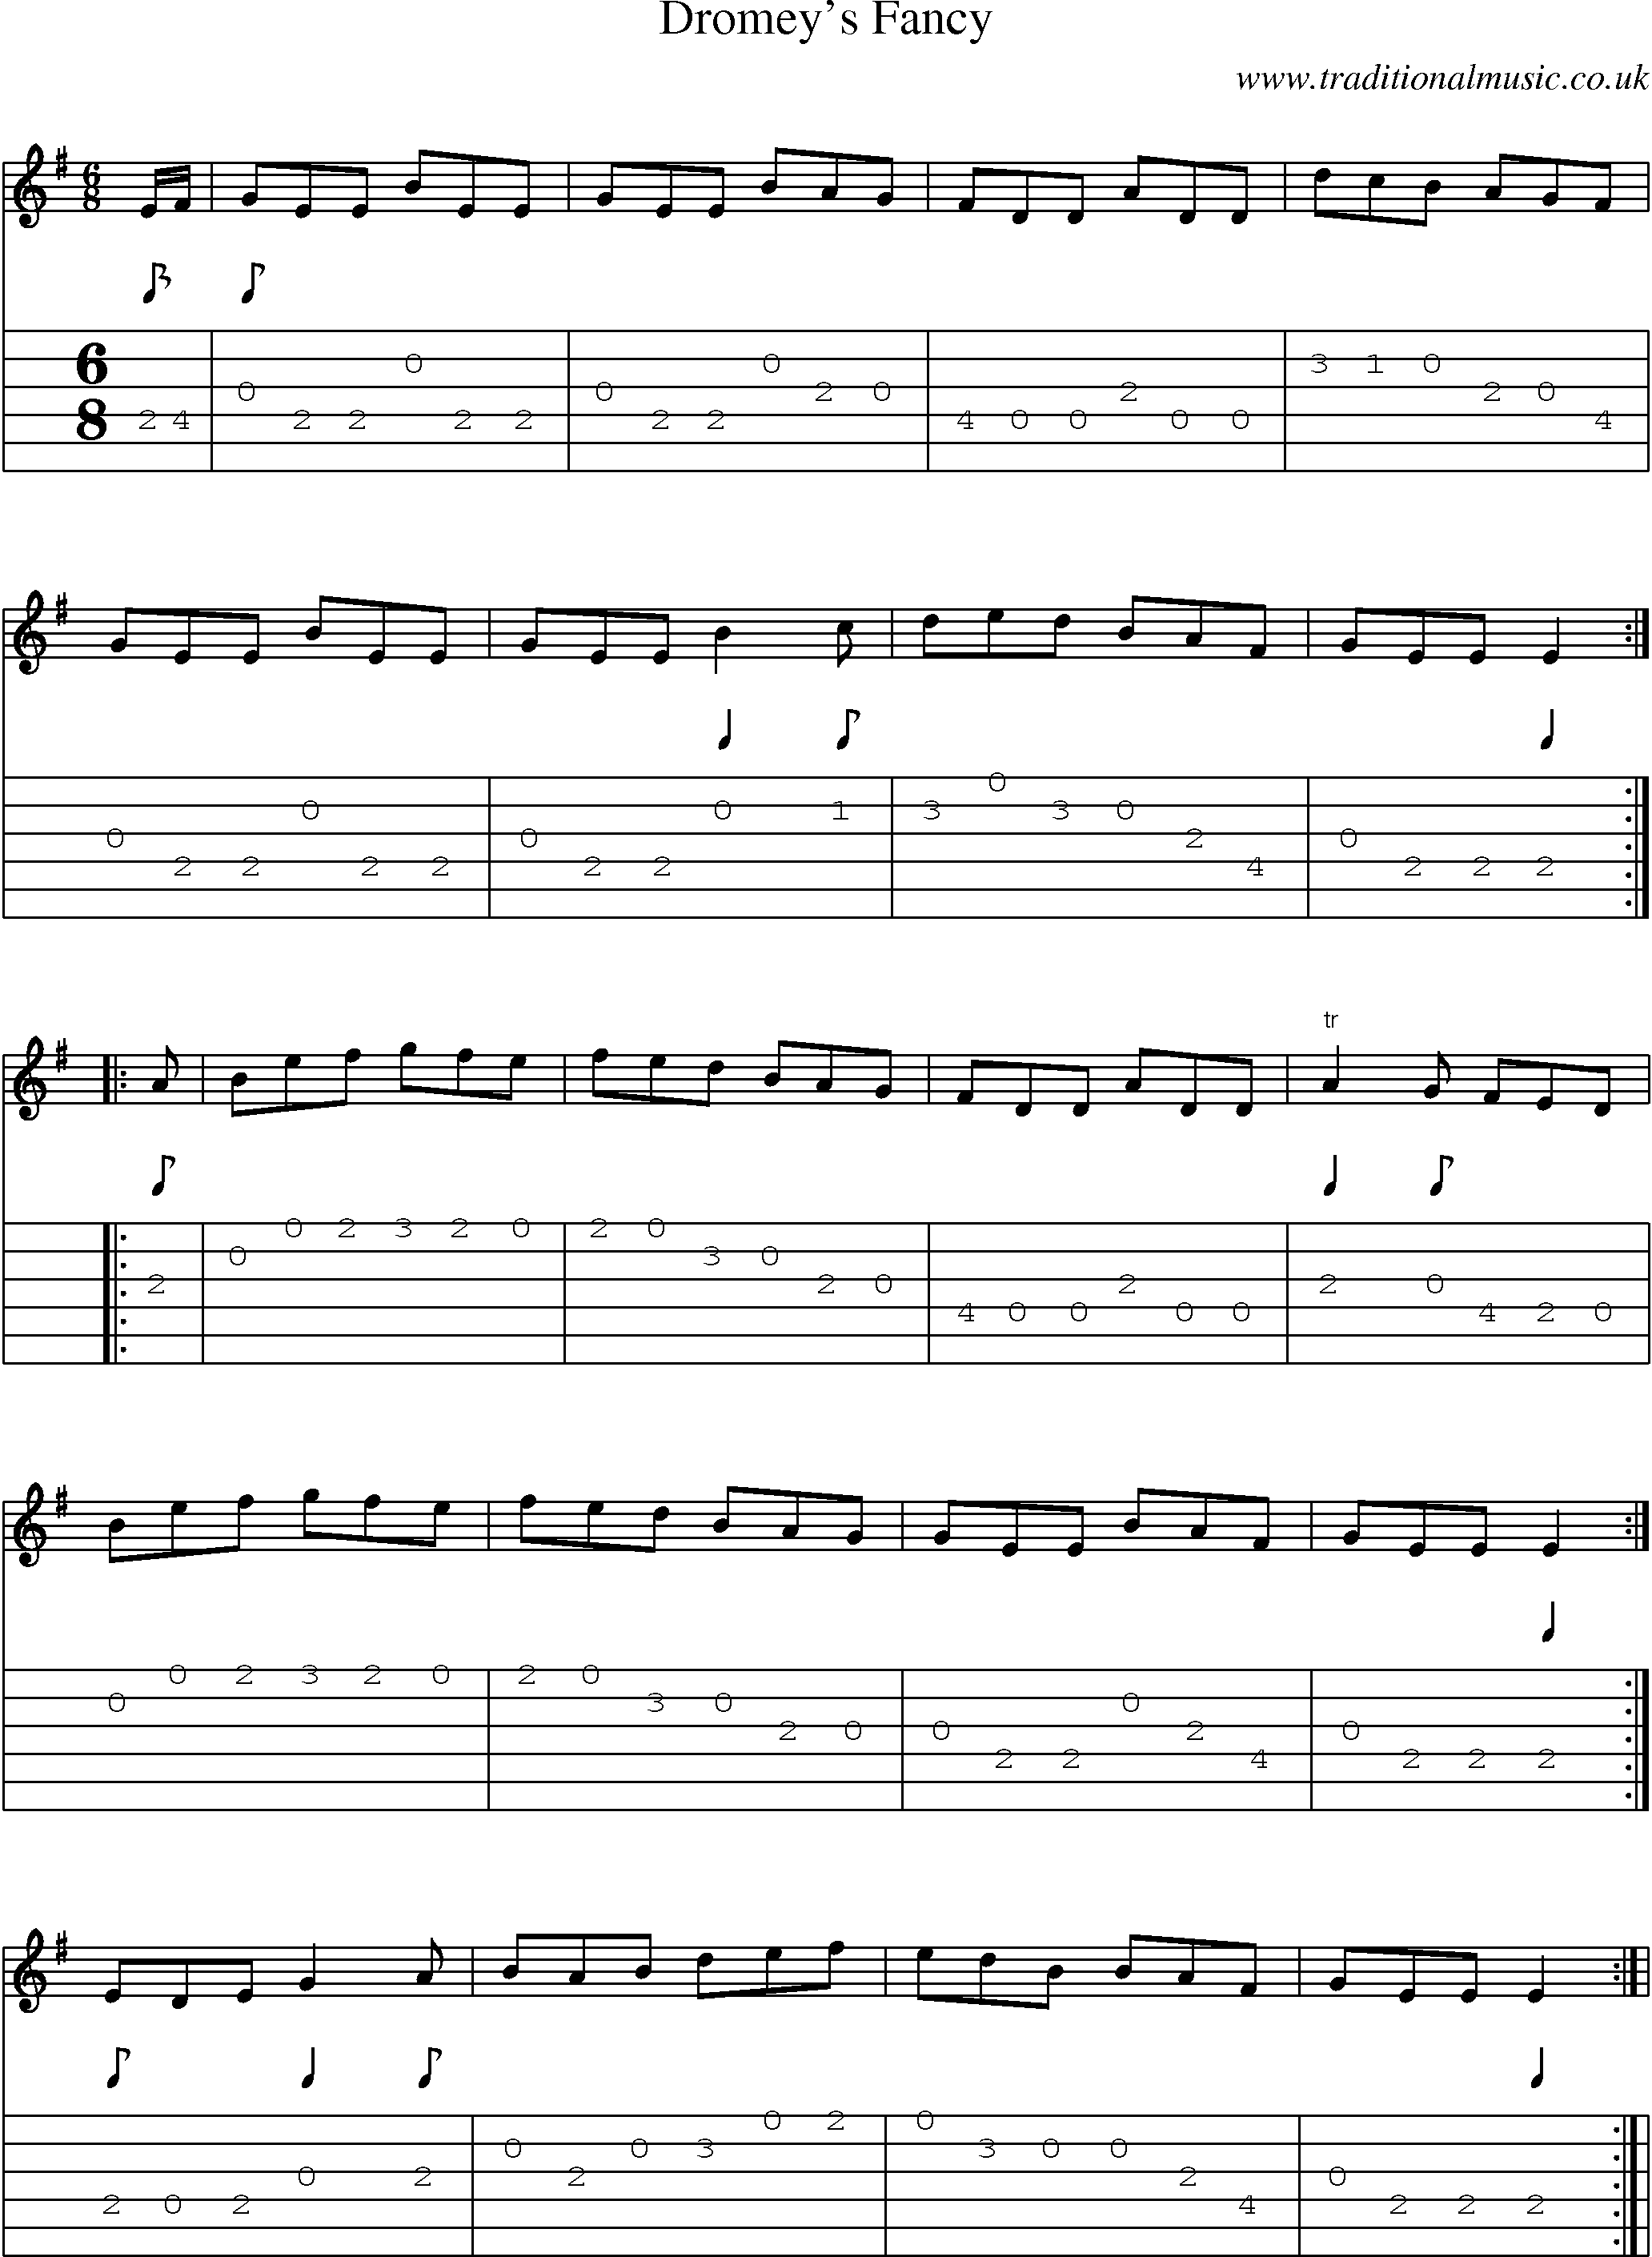 Music Score and Guitar Tabs for Dromeys Fancy